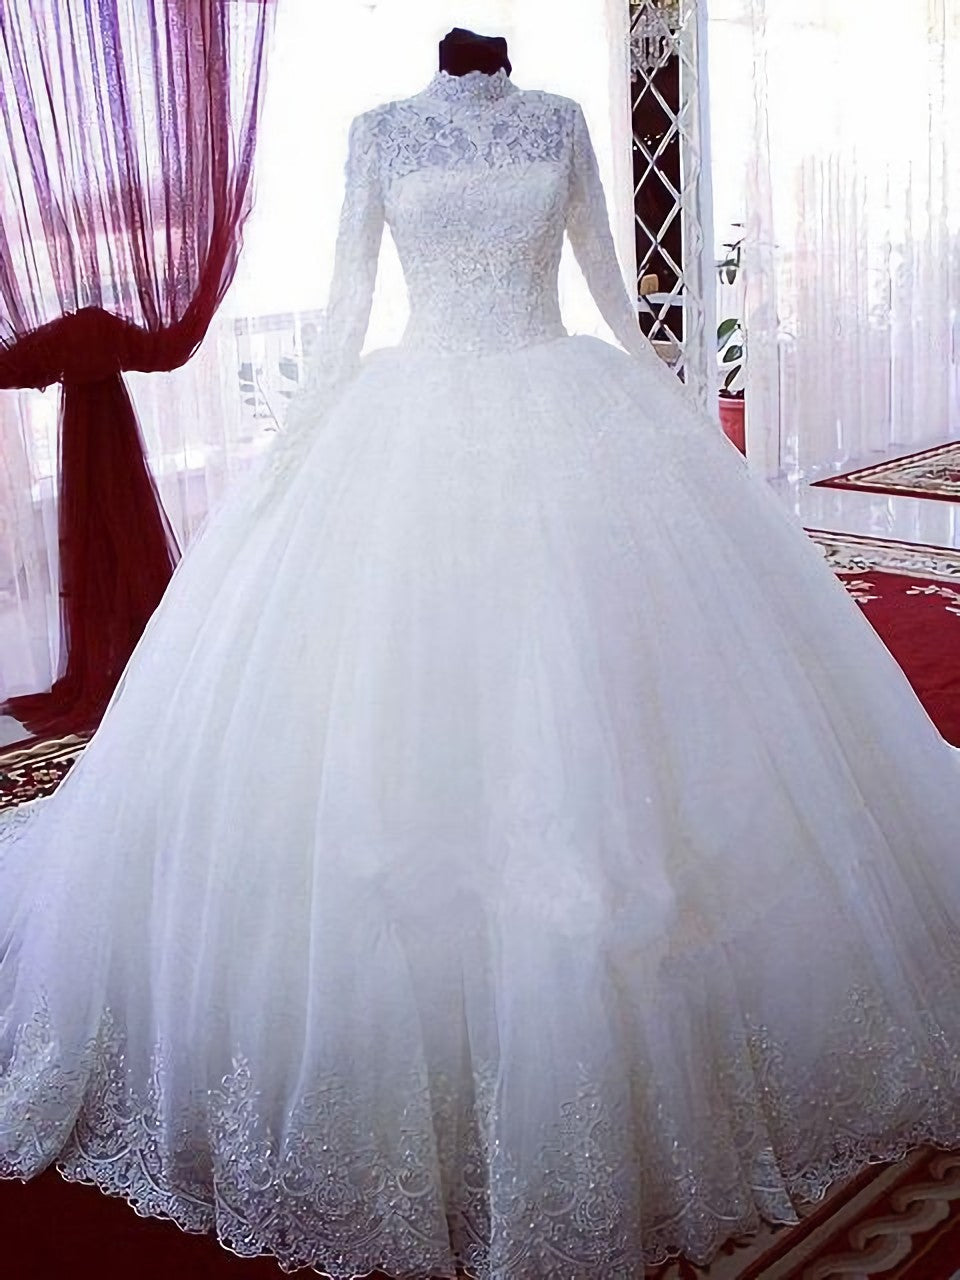 High Neck Long Sleeves Bridal Ball Gown Wedding Dresses, Bridal Gowns Prom Dress